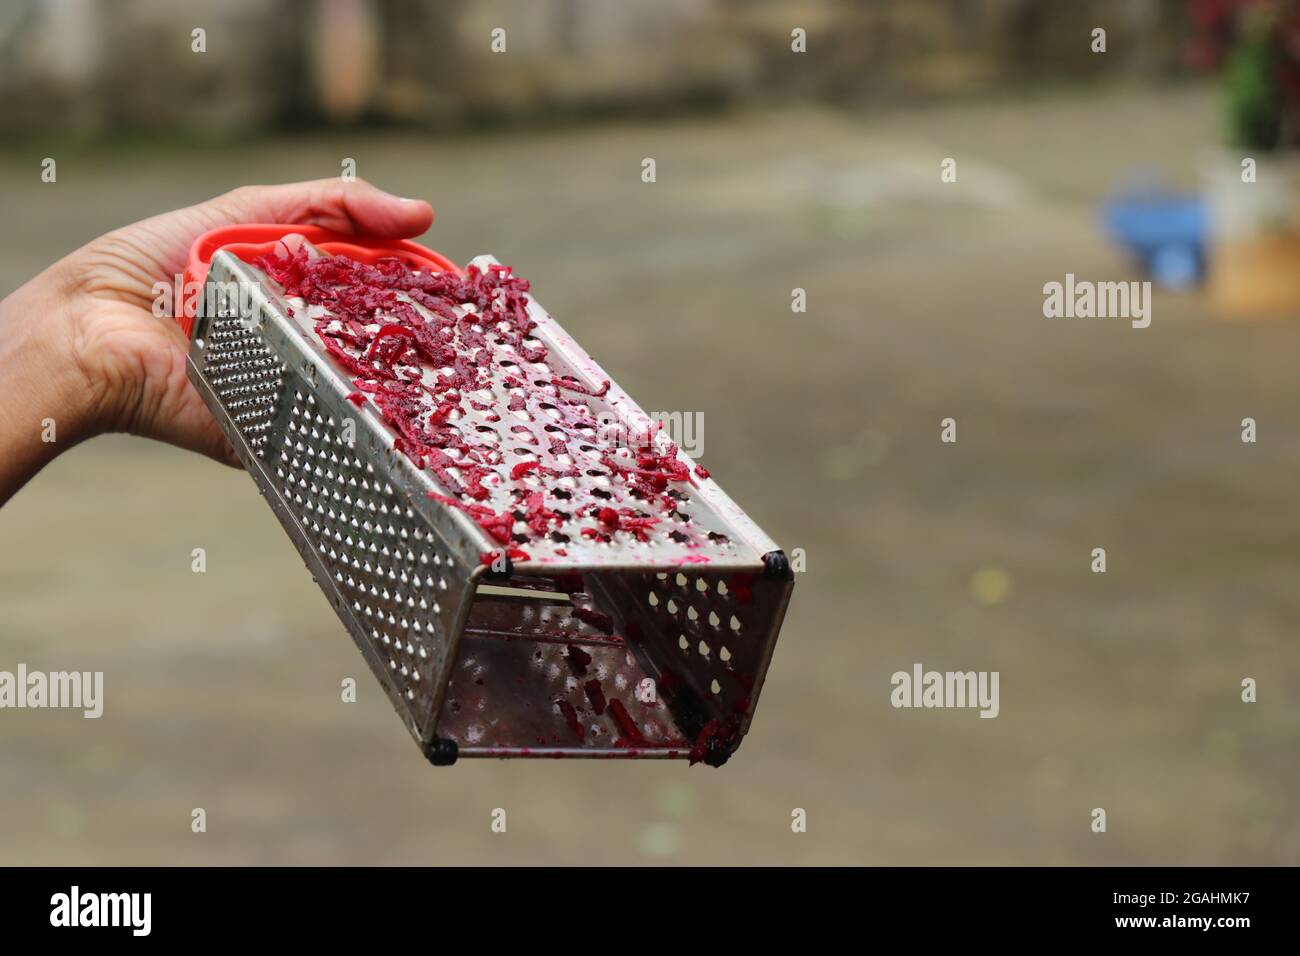 https://c8.alamy.com/comp/2GAHMK7/stainless-steel-grater-with-pieces-of-red-beetroot-held-in-hand-grater-for-vegetable-shredding-2GAHMK7.jpg